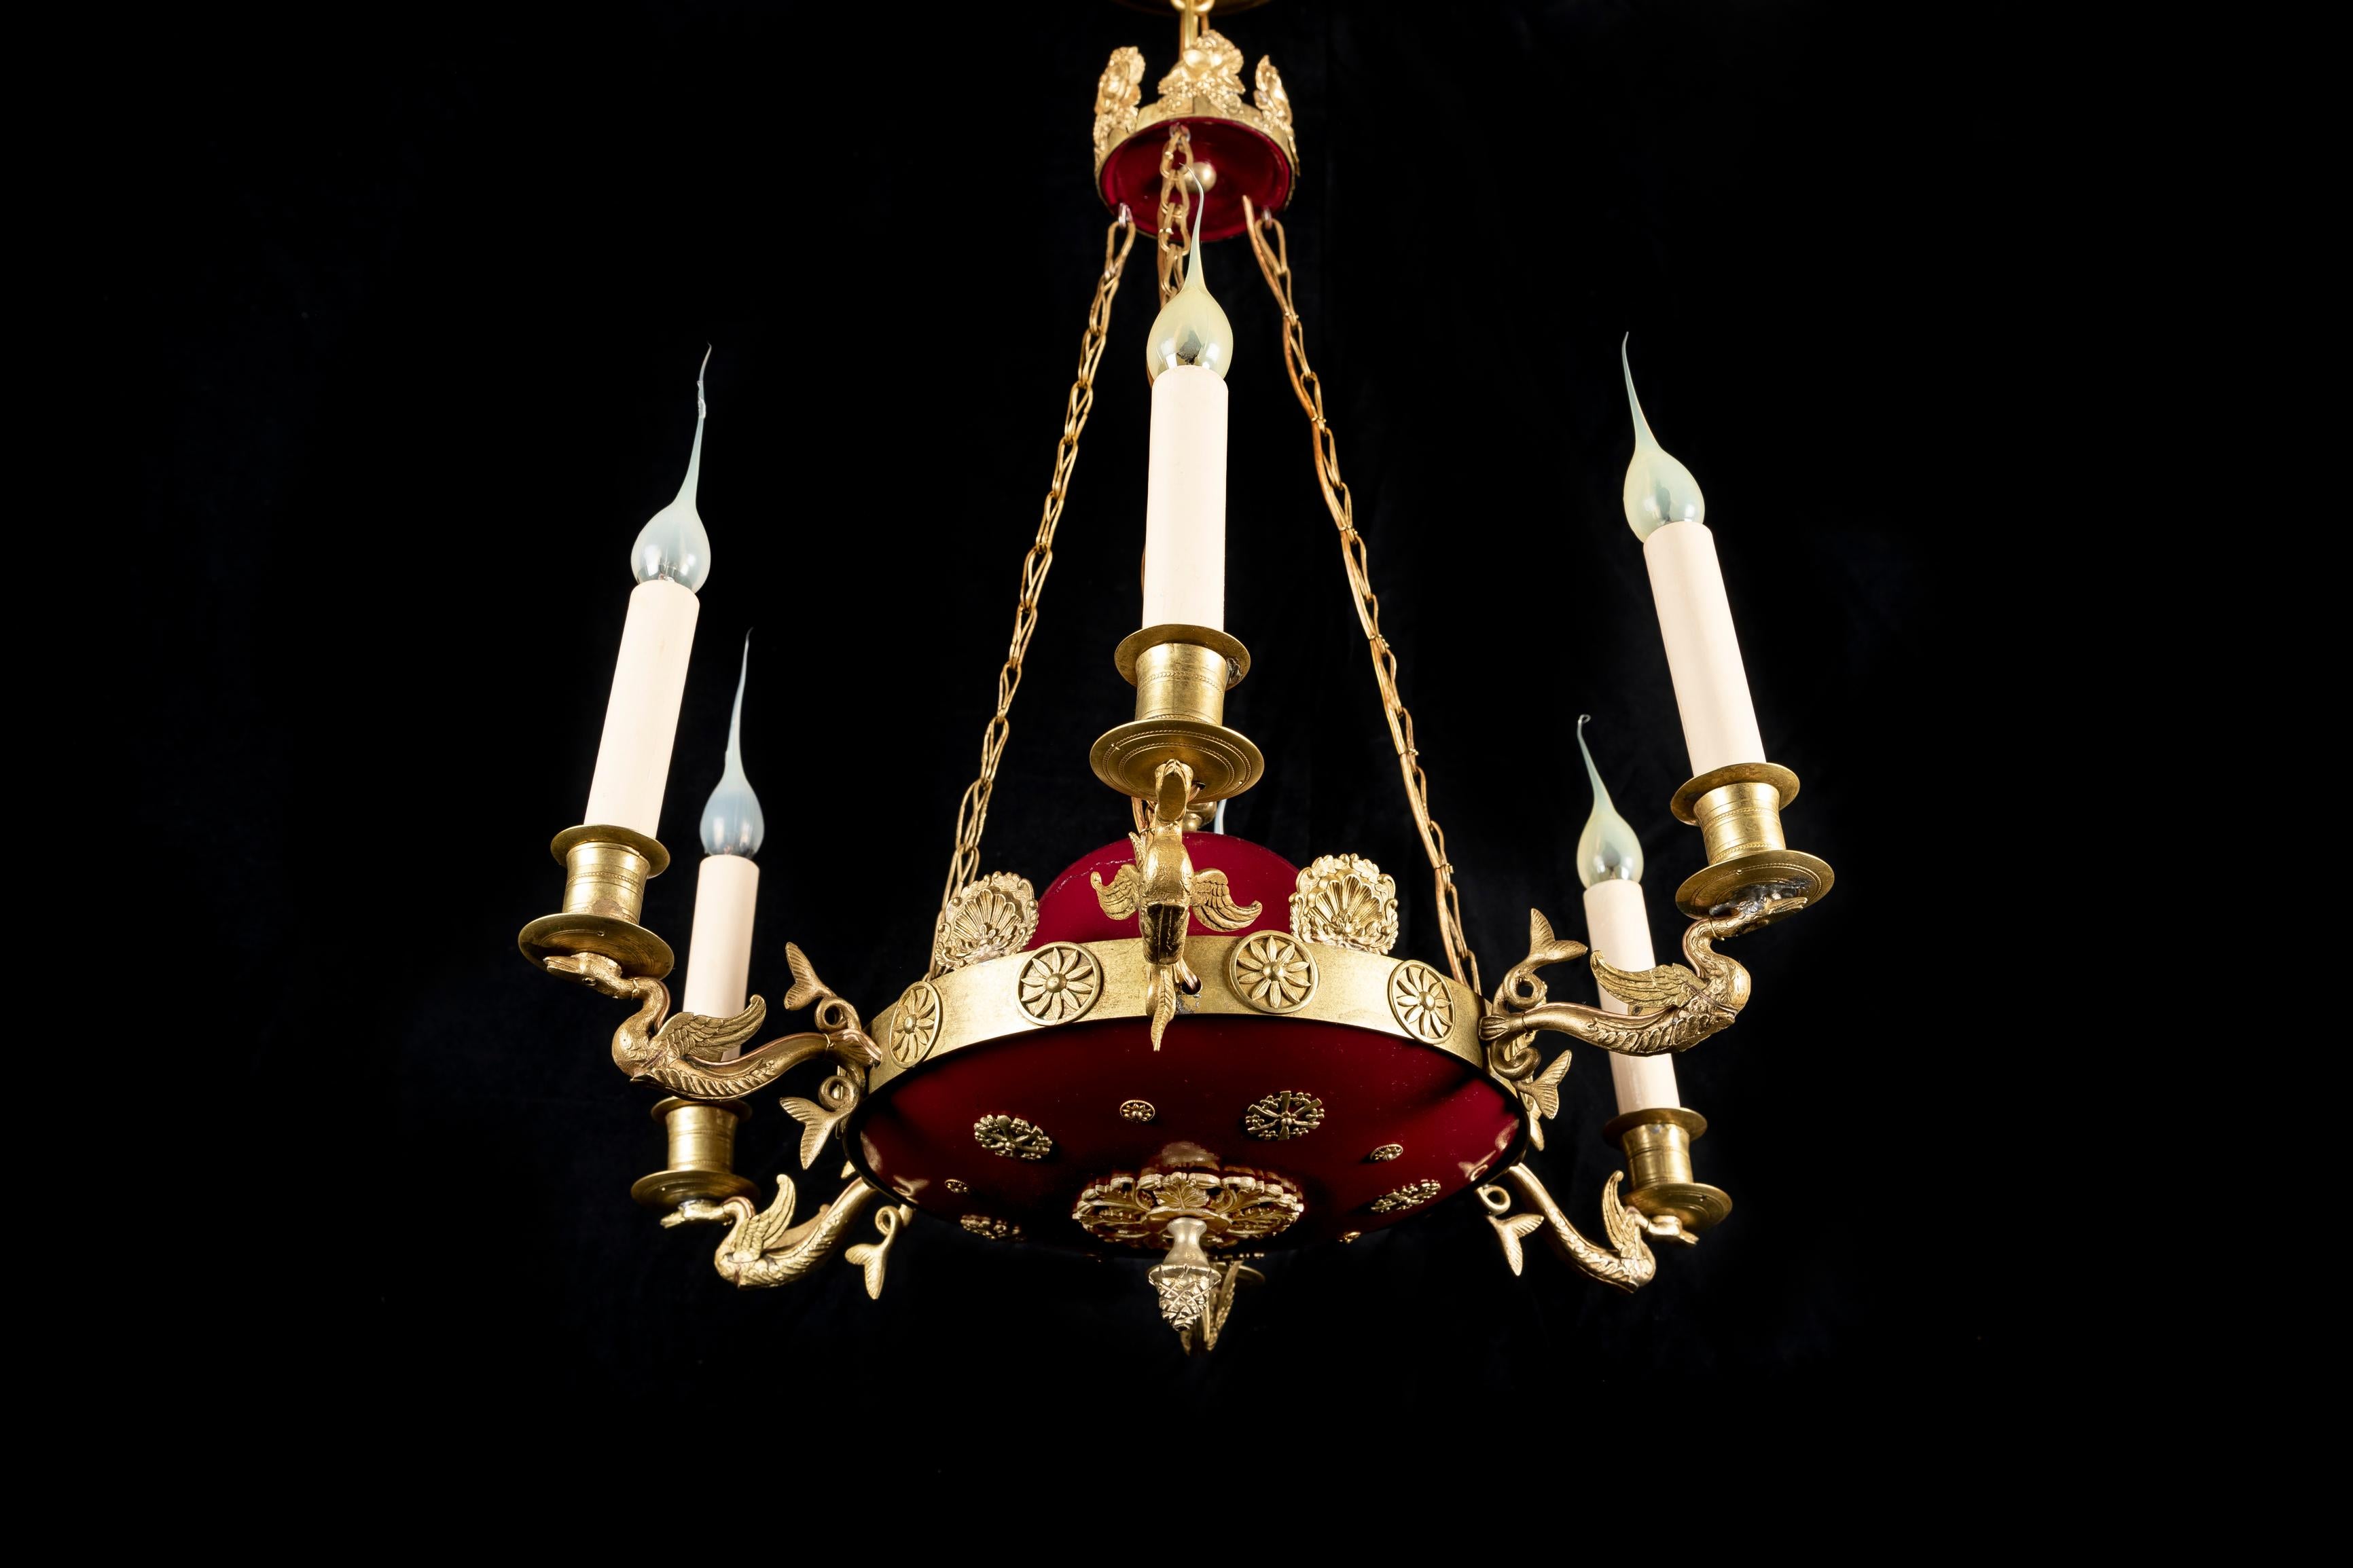 Gilt French Empire Style GIlt Bronze and Red Painted tole Swan Chandelier For Sale